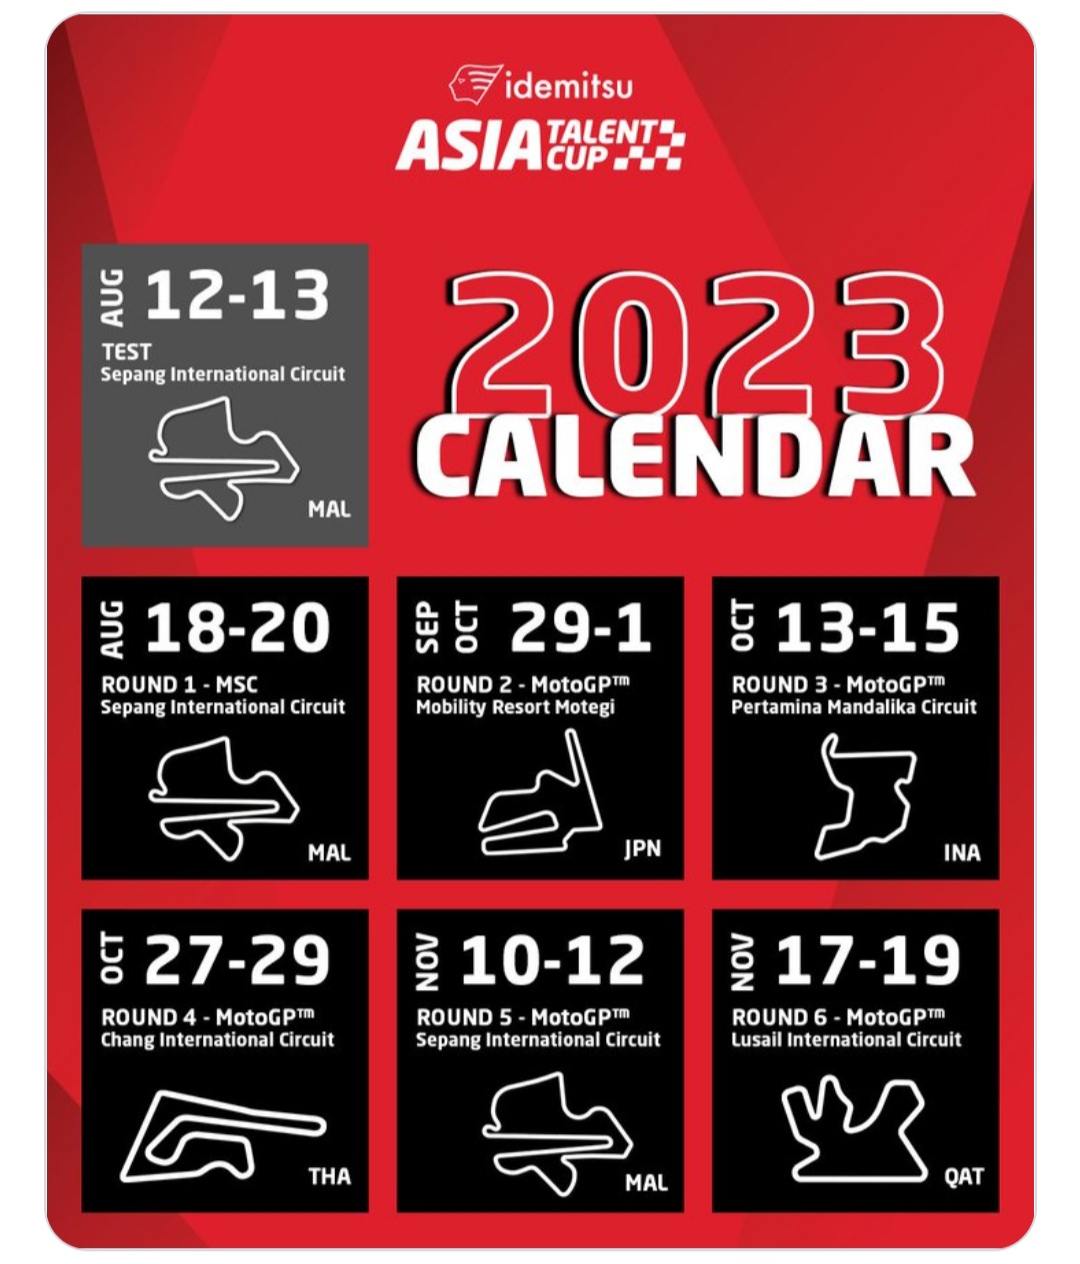 Asia Talent Cup 2023